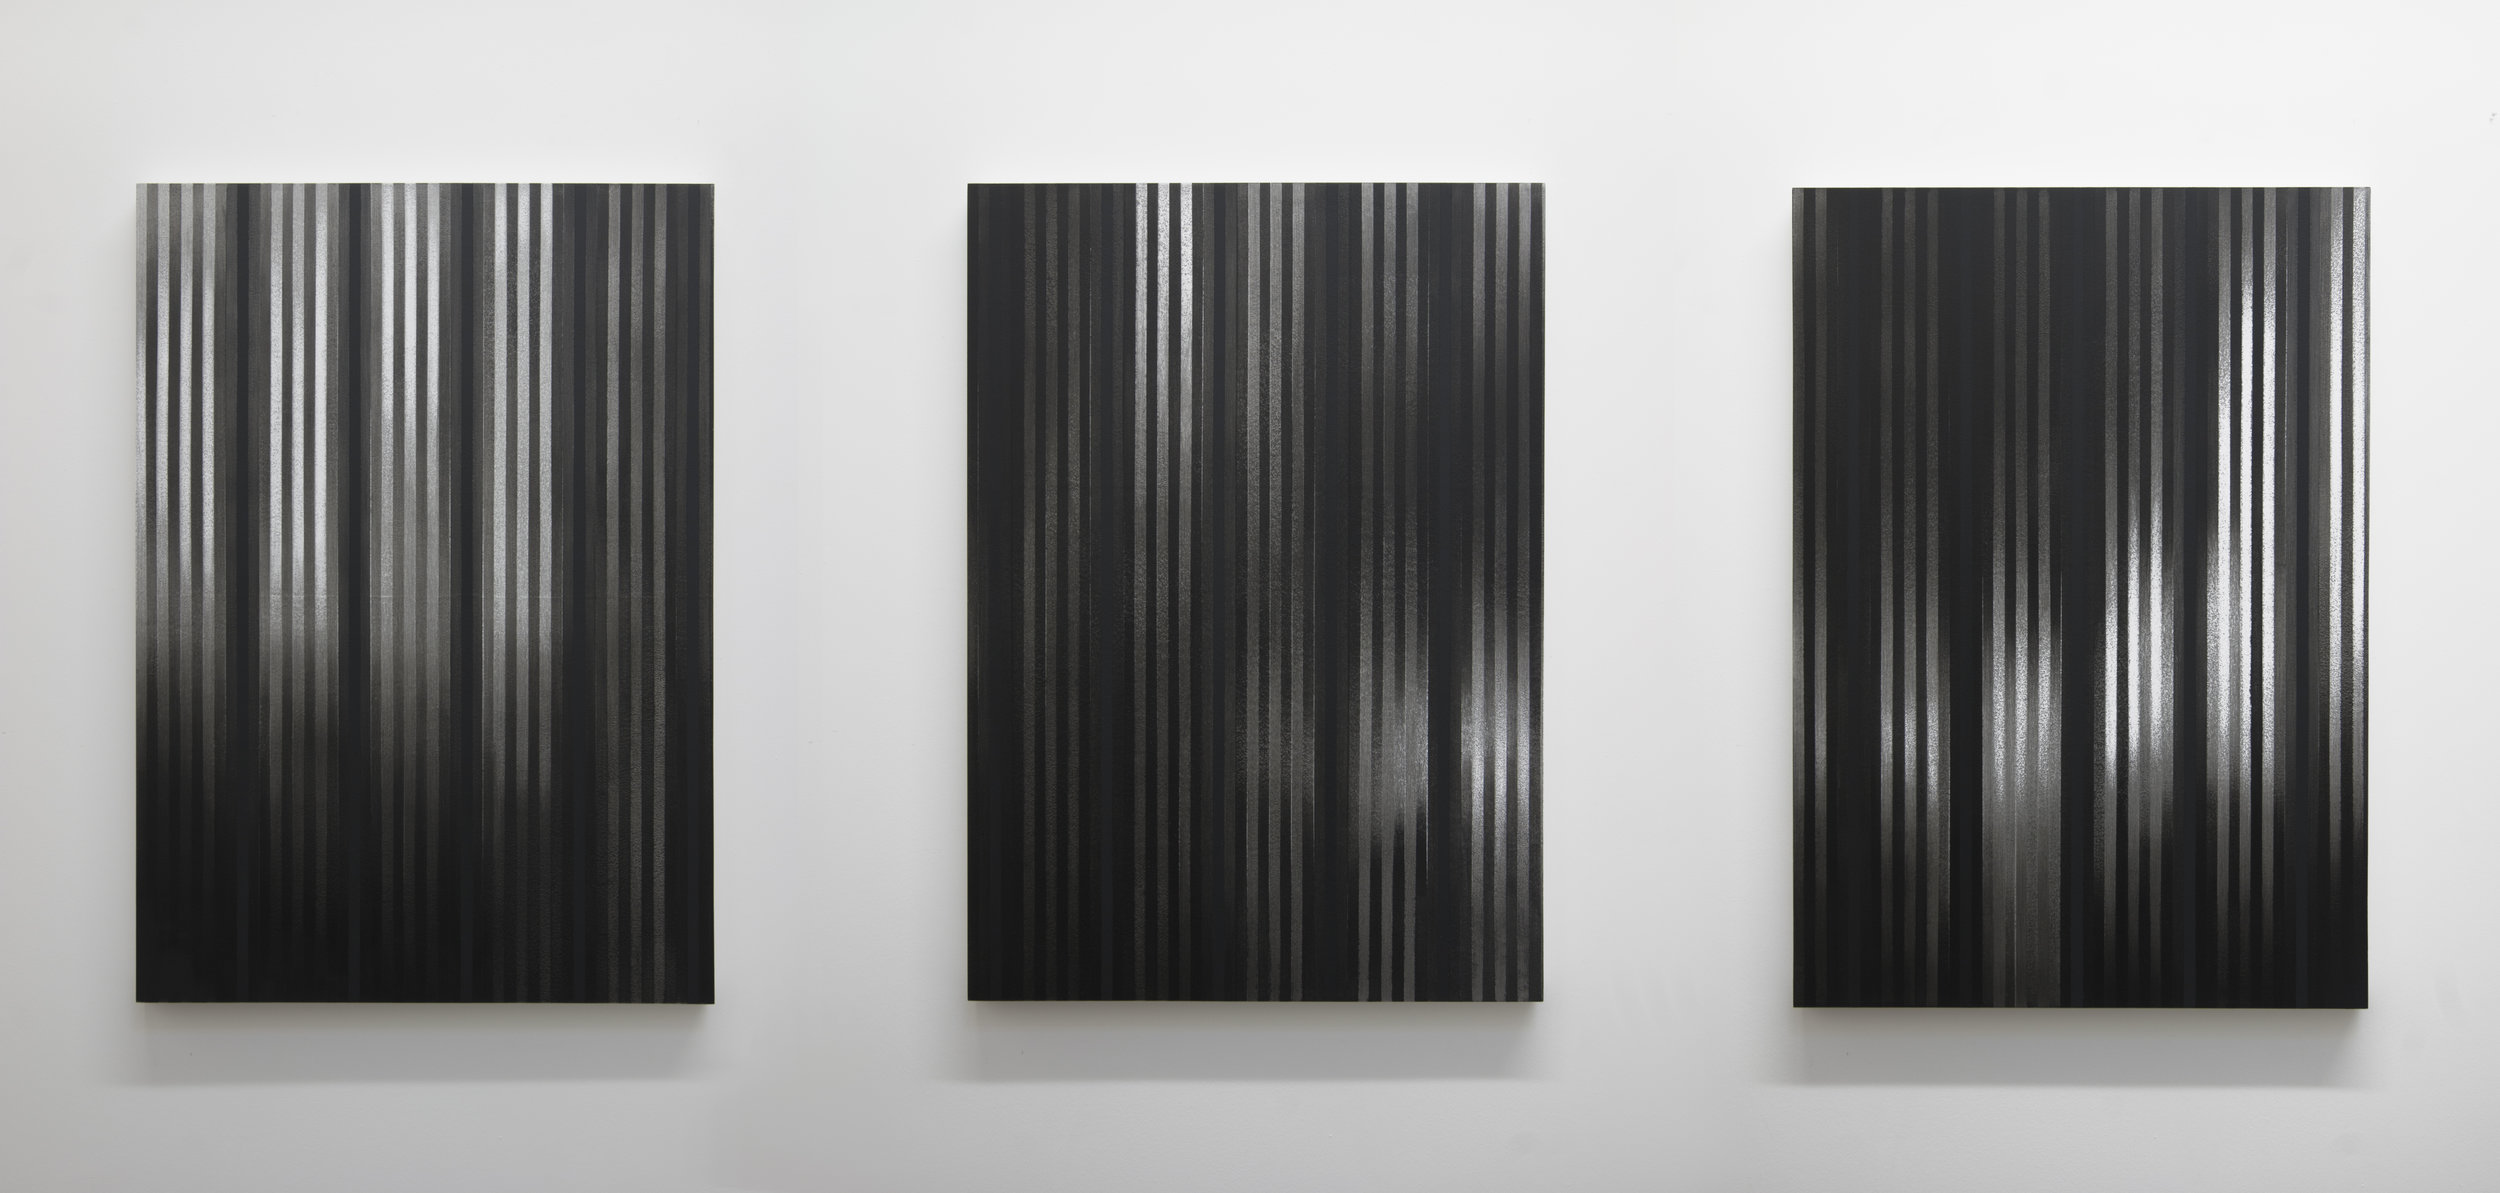  In Pursuit of Shadows, 2013 (Installation view)  Acrylic on panel, 36 x 26 inches each 